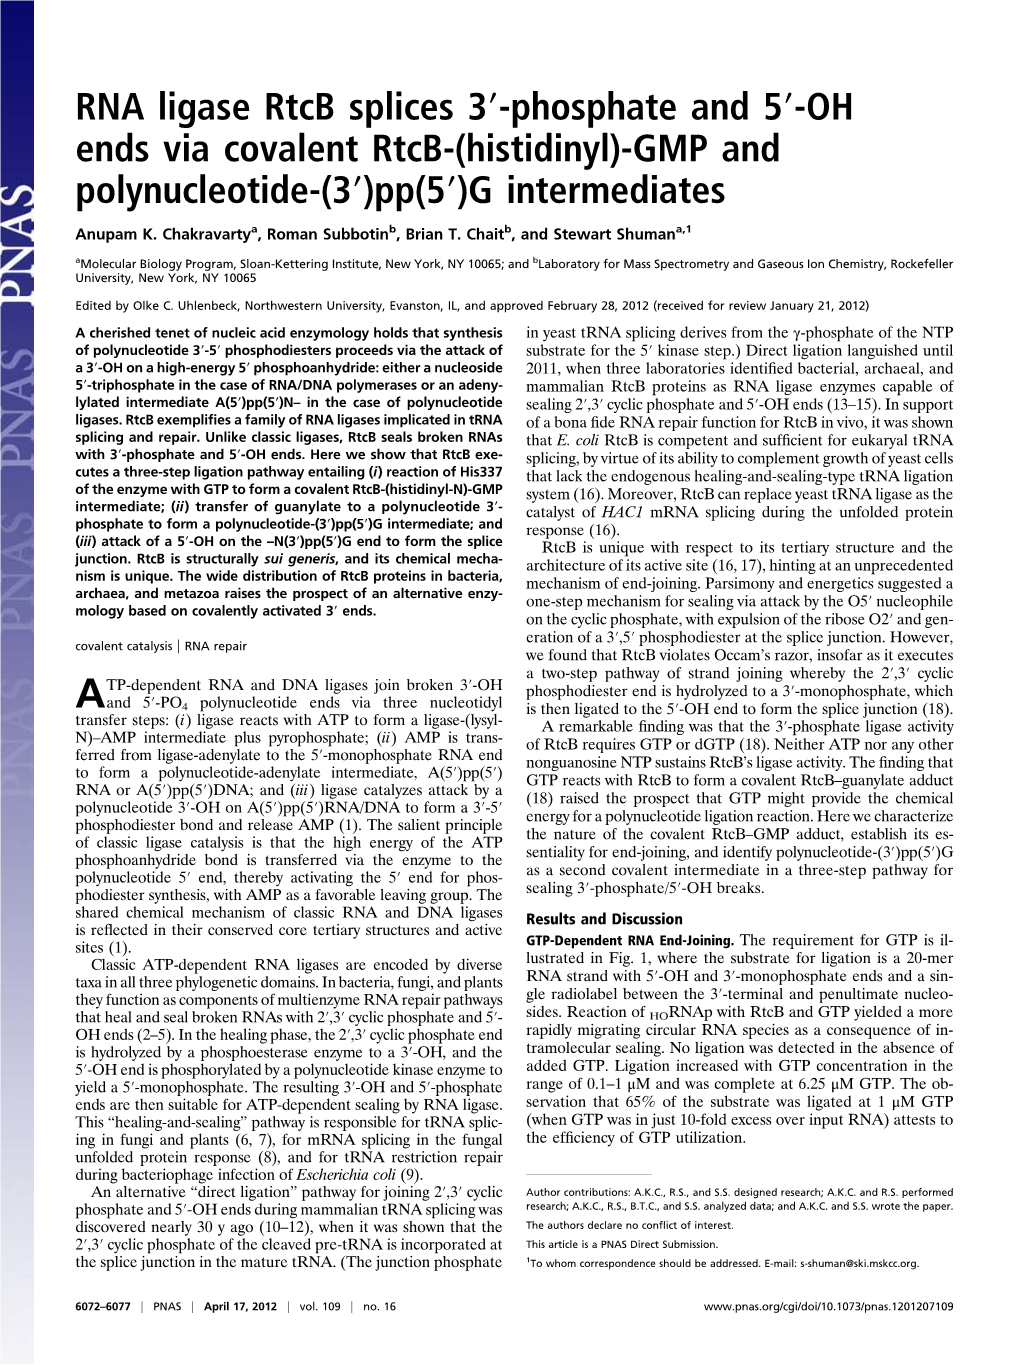 RNA Ligase Rtcb Splices 3′-Phosphate and 5′-OH Ends Via Covalent Rtcb-(Histidinyl)-GMP and Polynucleotide-(3′)Pp(5′)G Intermediates